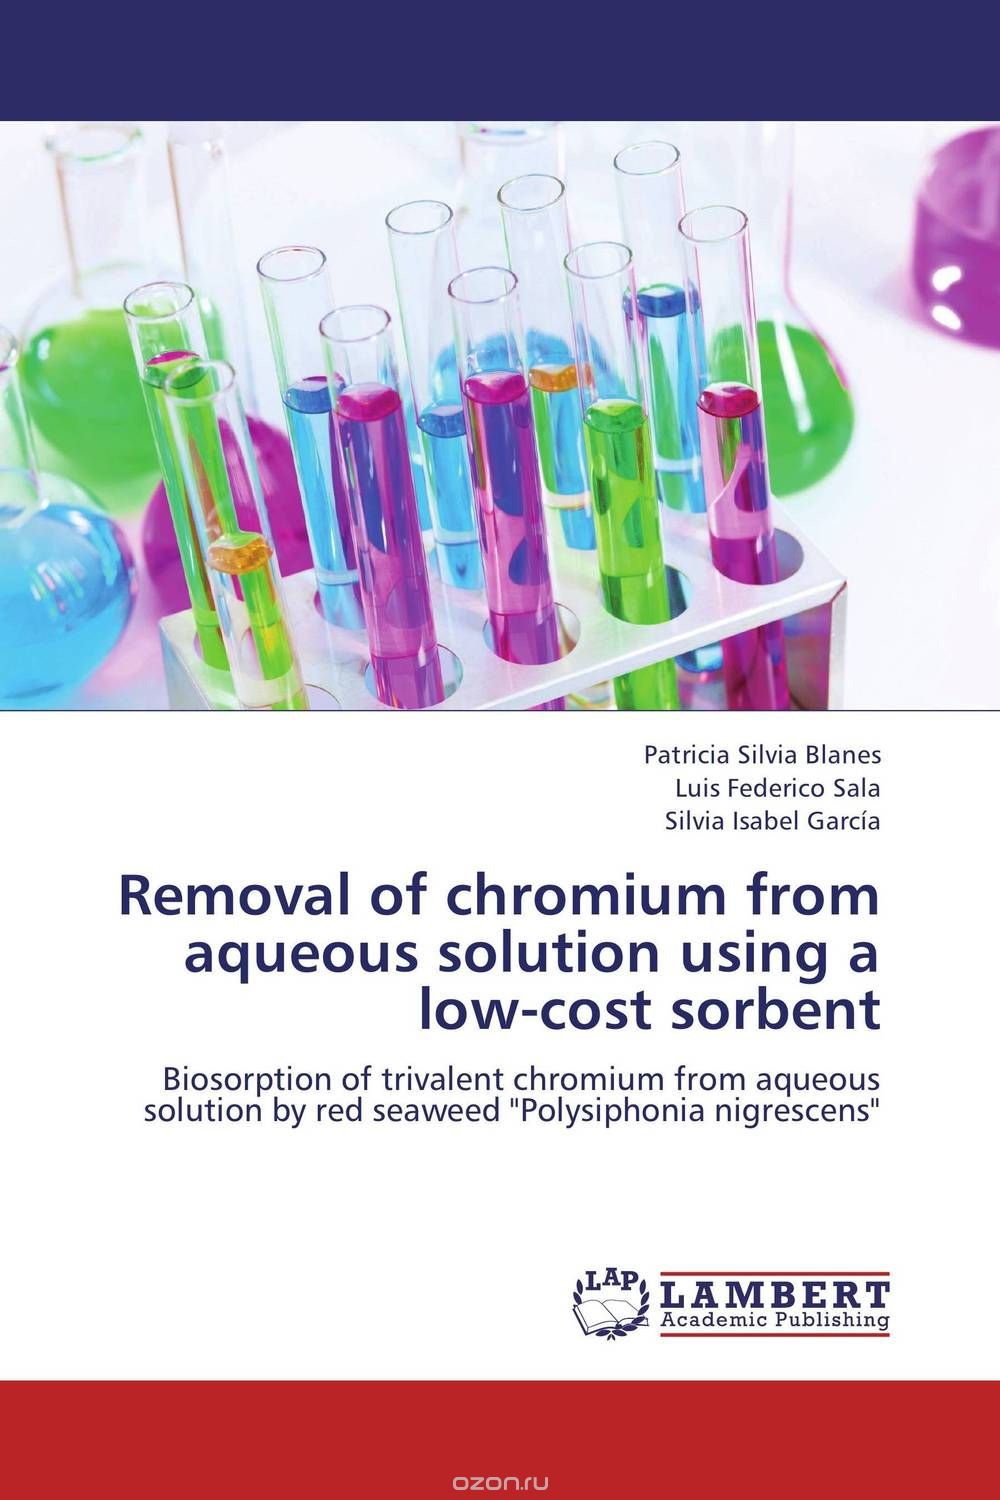 Скачать книгу "Removal of chromium from aqueous solution using a low-cost sorbent"